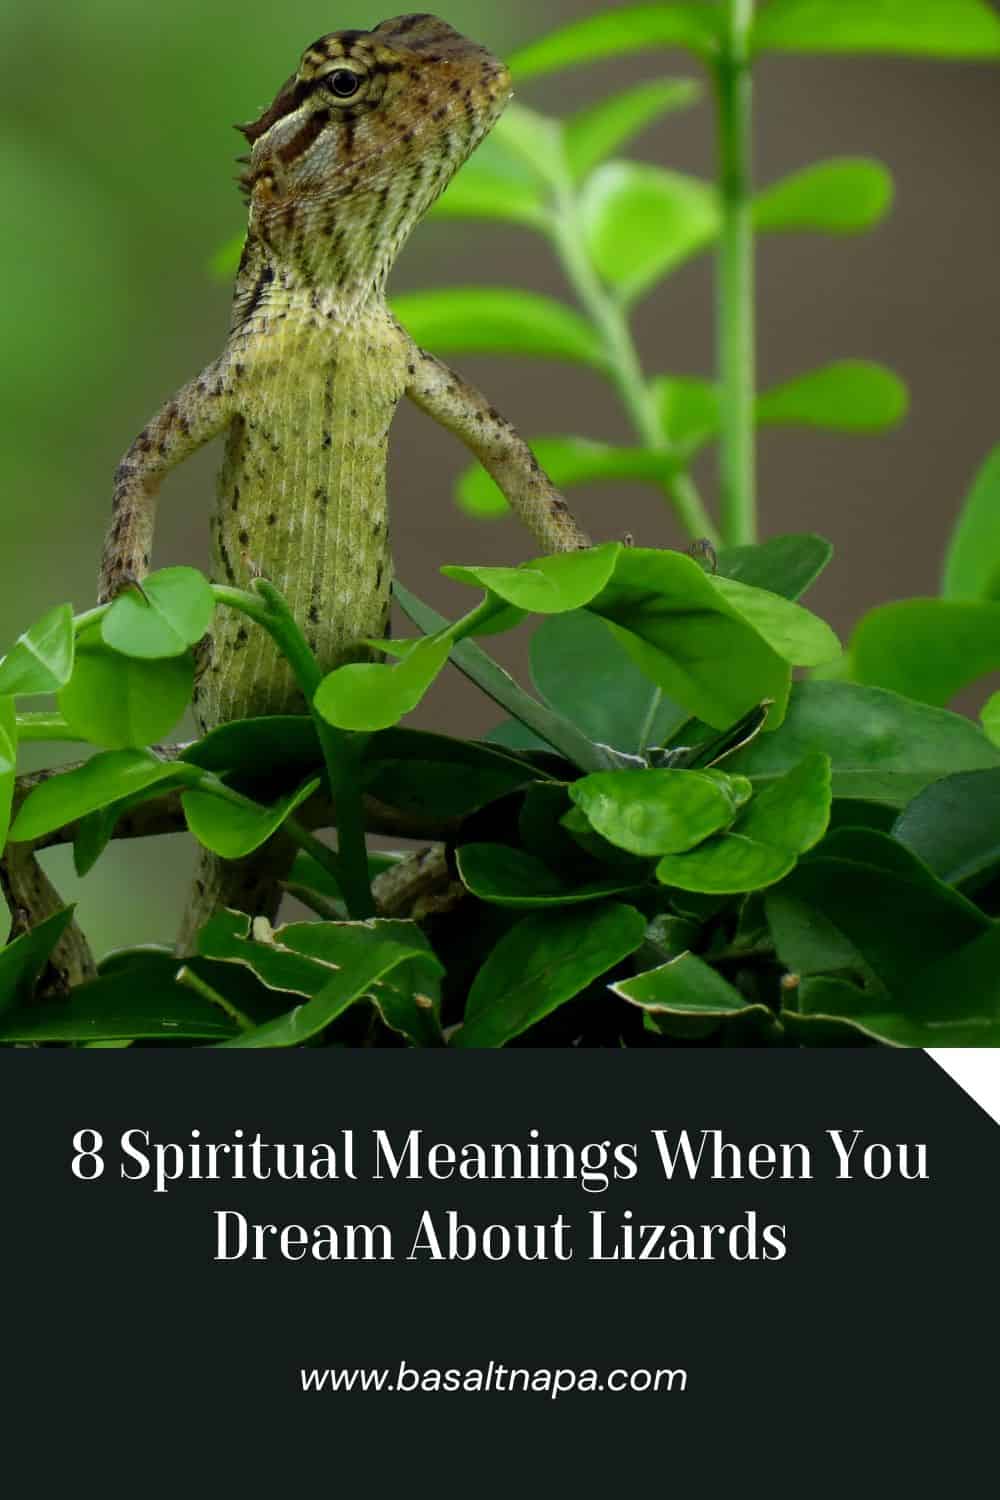 8 Spiritual Meanings When You Dream About Lizards